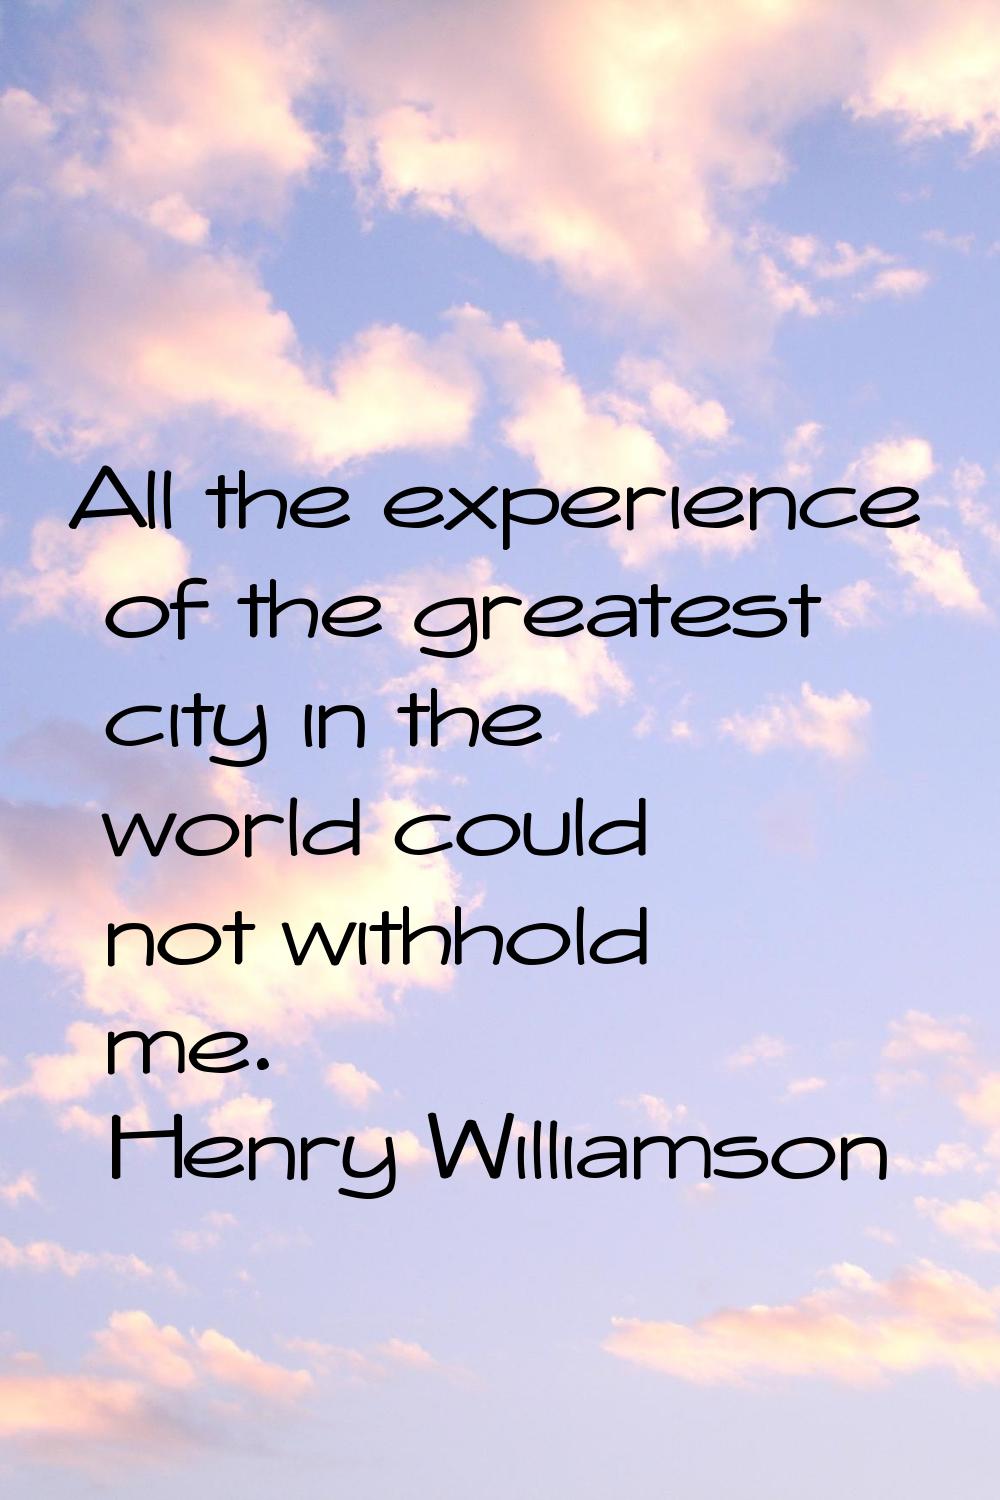 All the experience of the greatest city in the world could not withhold me.